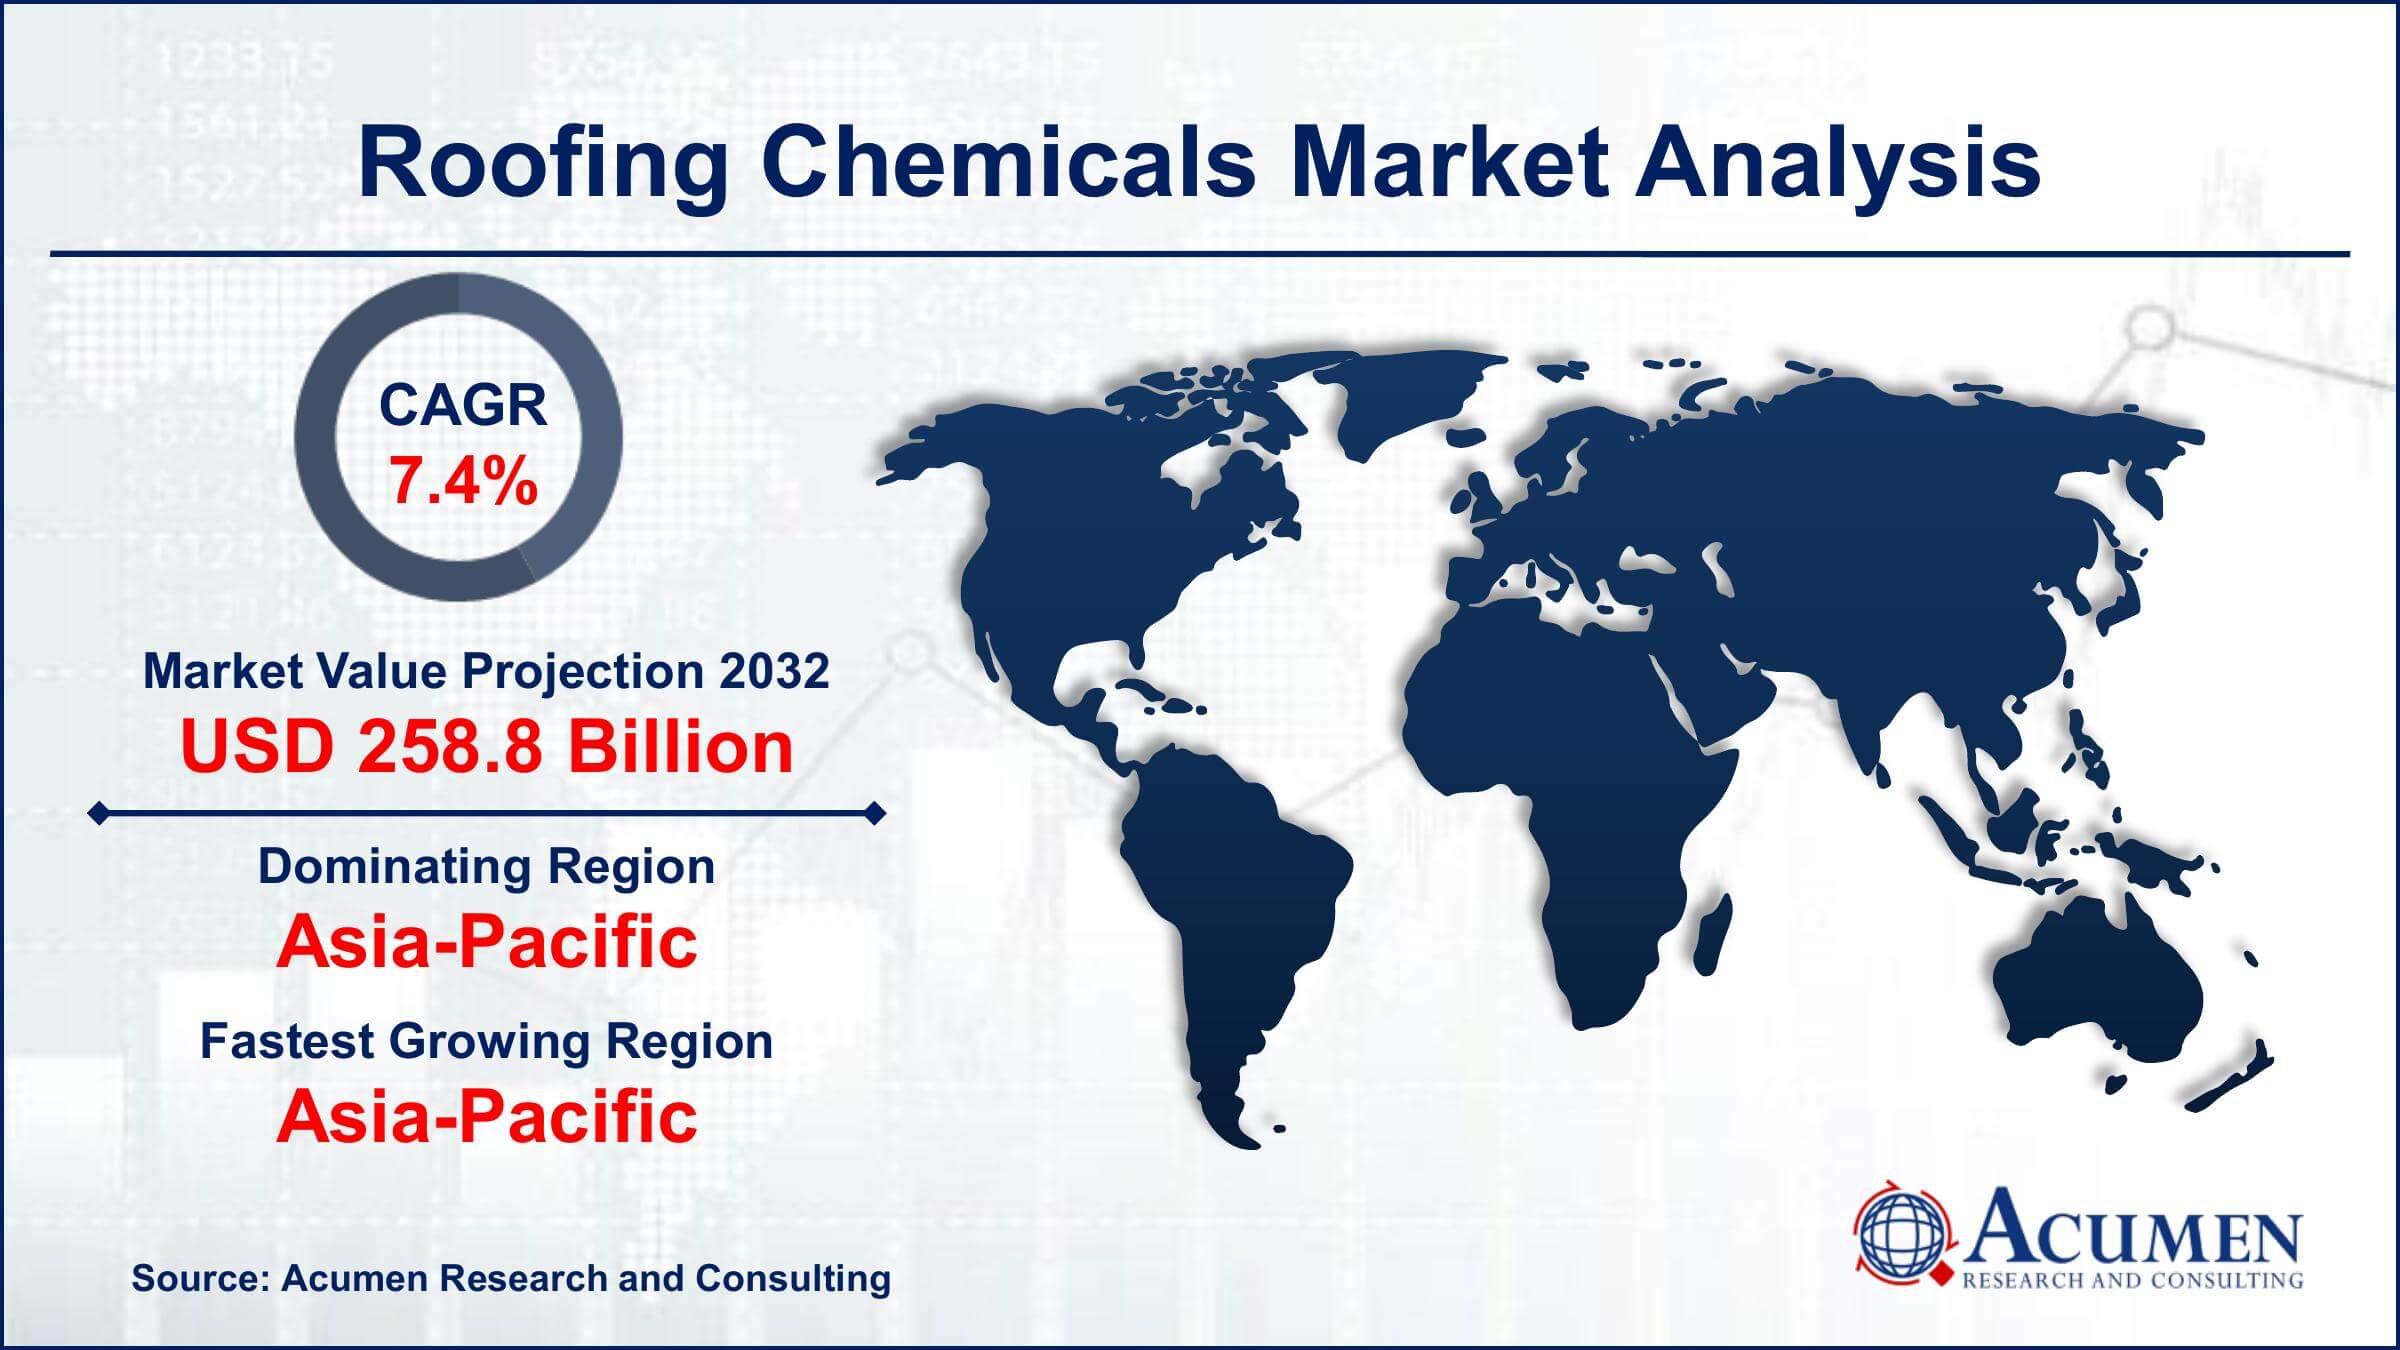 Global Roofing Chemicals Market Trends